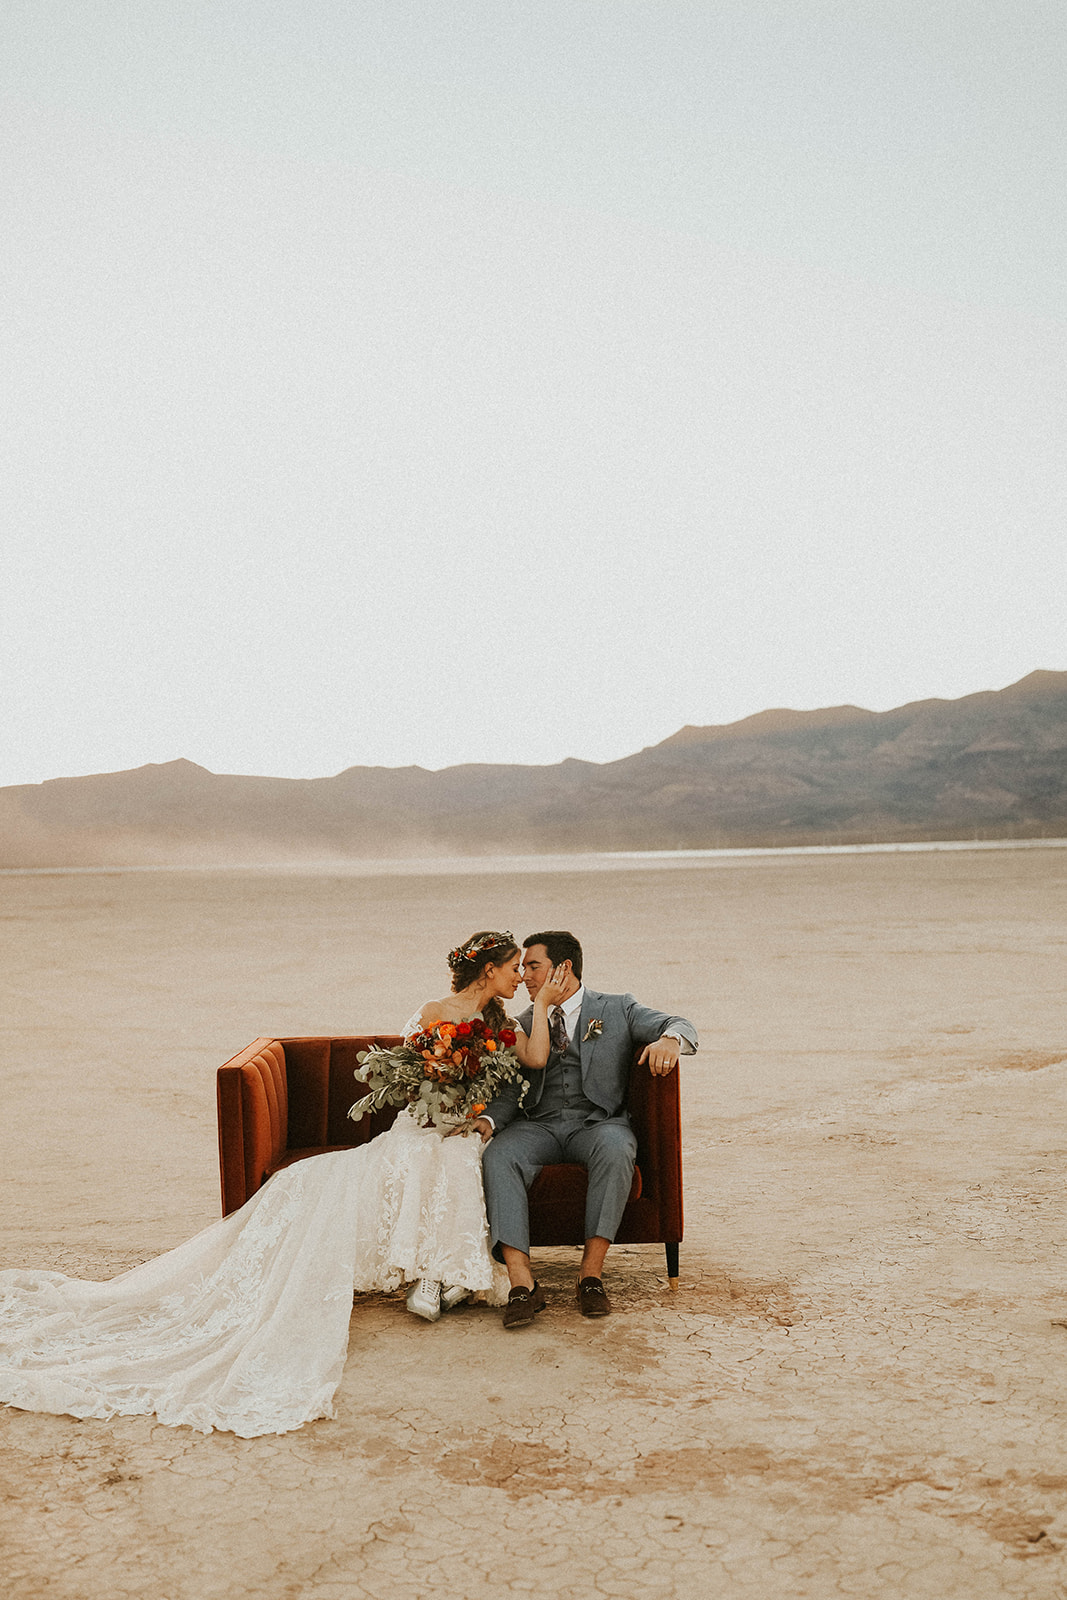 Newlyweds sitting on Velvet Couch Touching Noses during Sunset in Dry Lake Bed Fall Inspired Elopement in Las Vegas